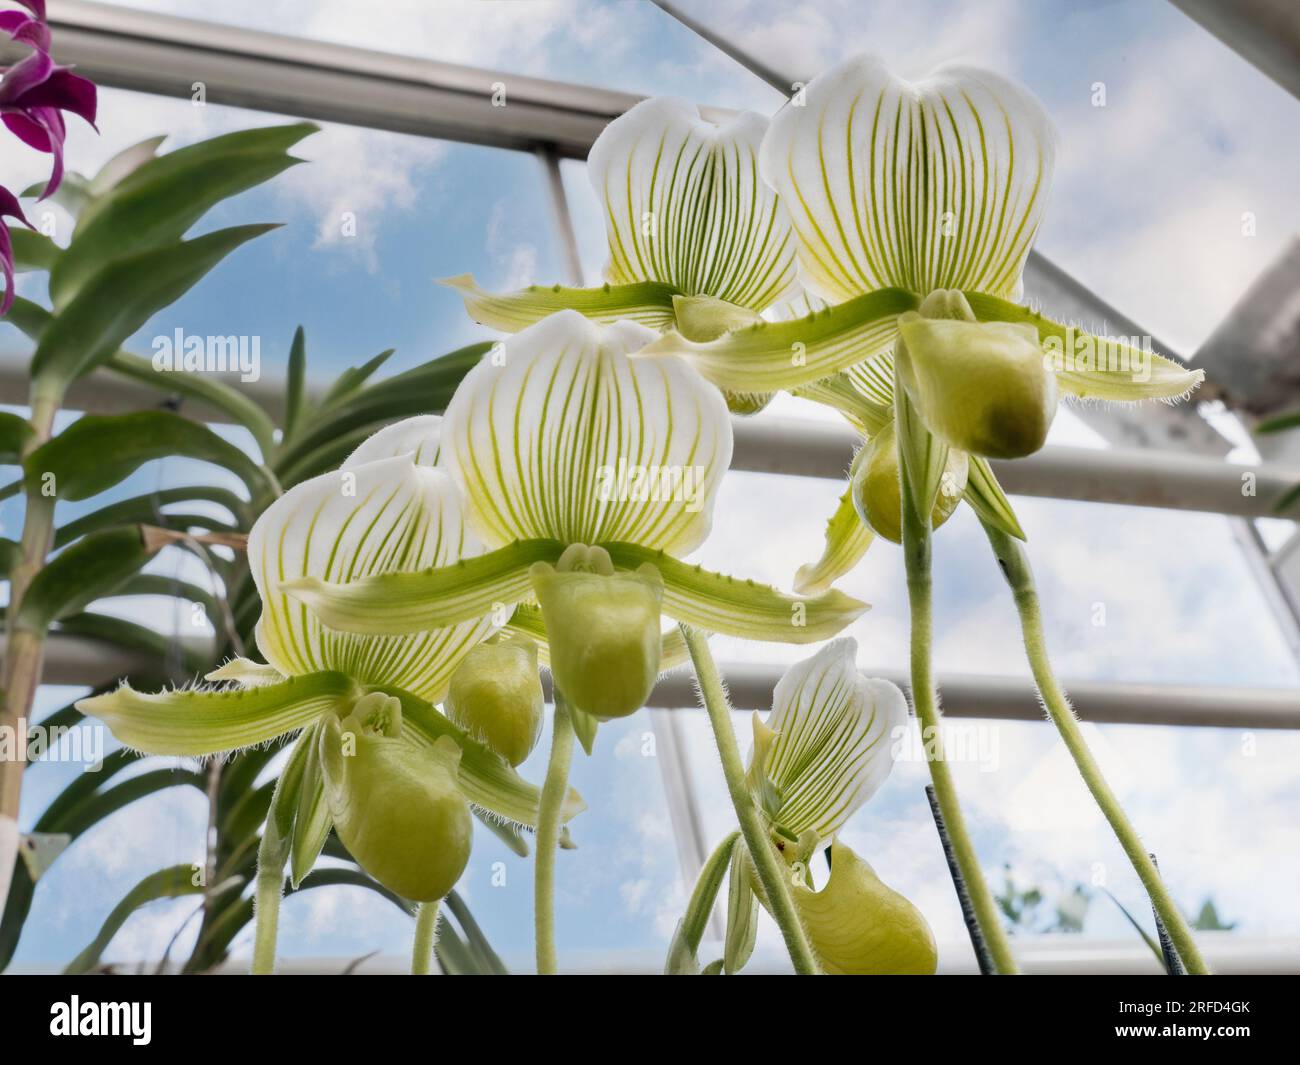 Slipper orchids - Paphiopedilum, thriving in modern glasshouse situation. Surrey UK Stock Photo